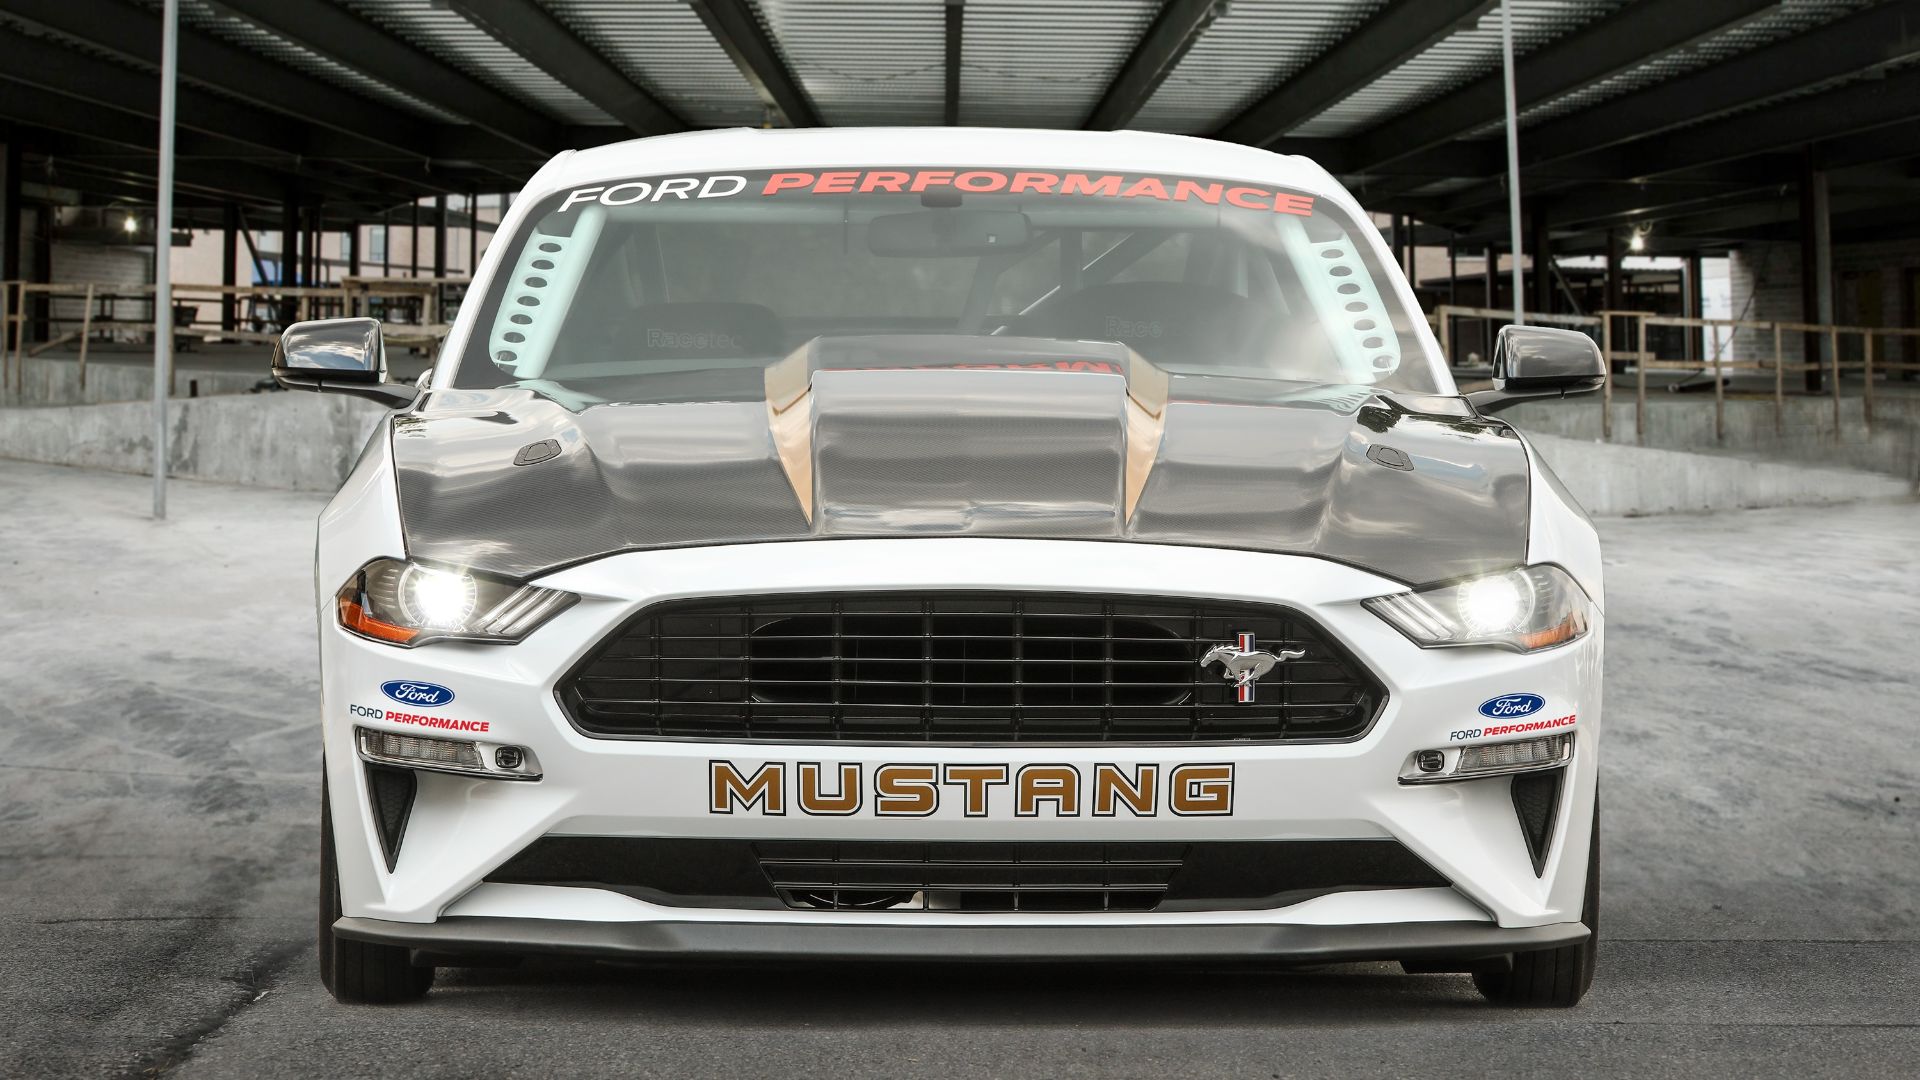 Ford Mustang Cobra Powered by Ford Motor Company Car Enthusiast Racing Performance Race Sport Classic Auto Mechanic 